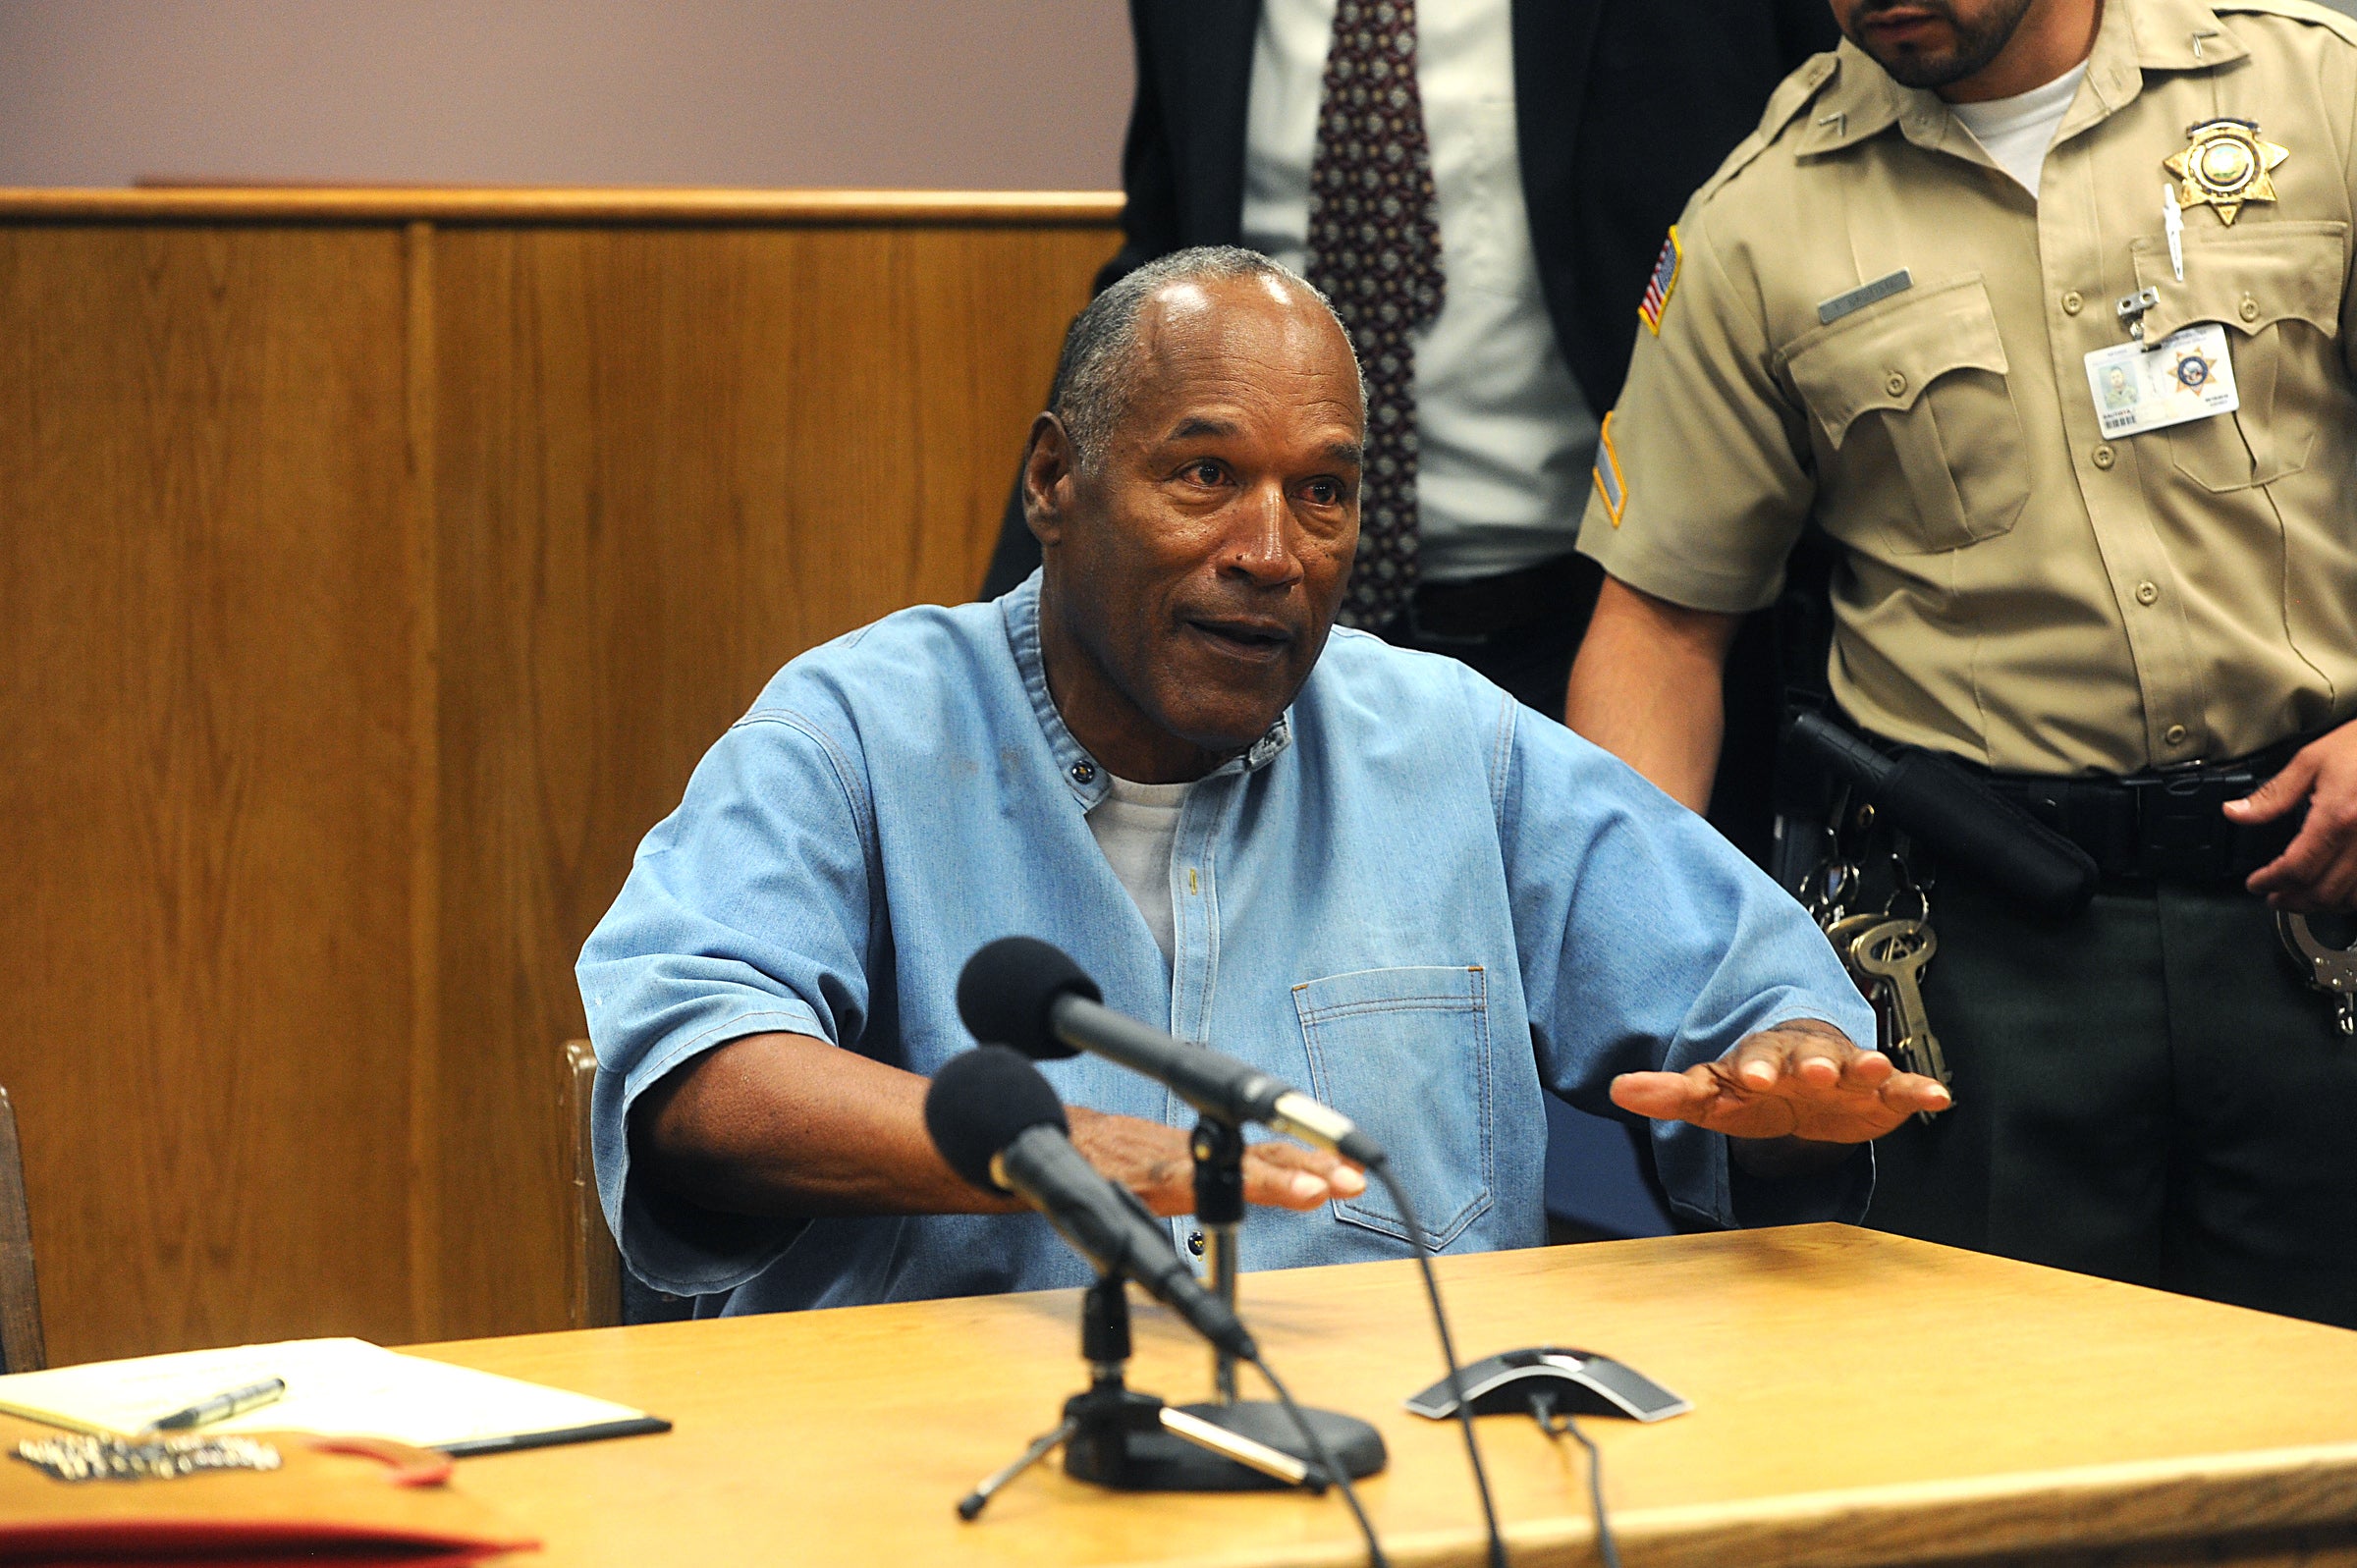 File: OJ Simpson’s lawyer says he ‘is a completely free man now’